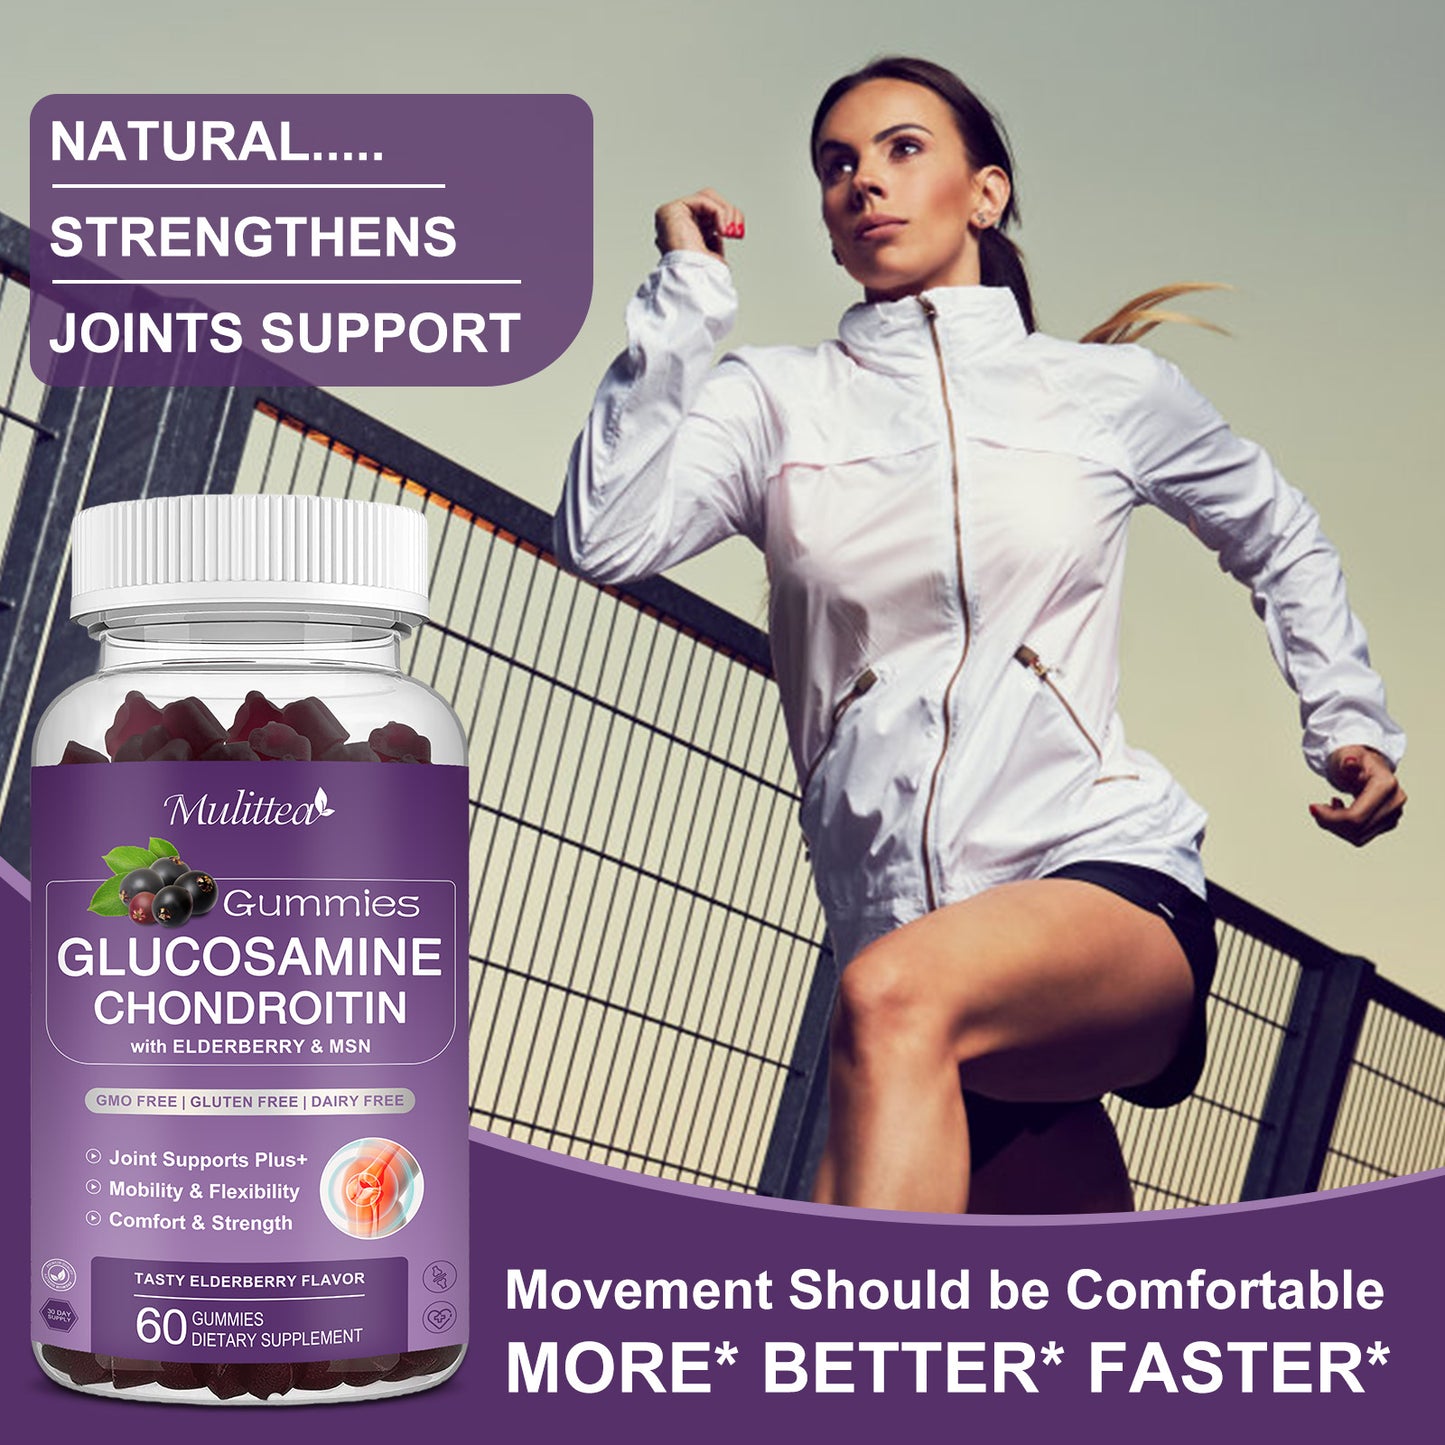 Glucosamine Chondroitin Gummies - Extra Strength Joint Support Gummies with MSM & Elderberry for Natural Joint Support supplemen, Antioxidant Immune Support for Adults, Men & Women